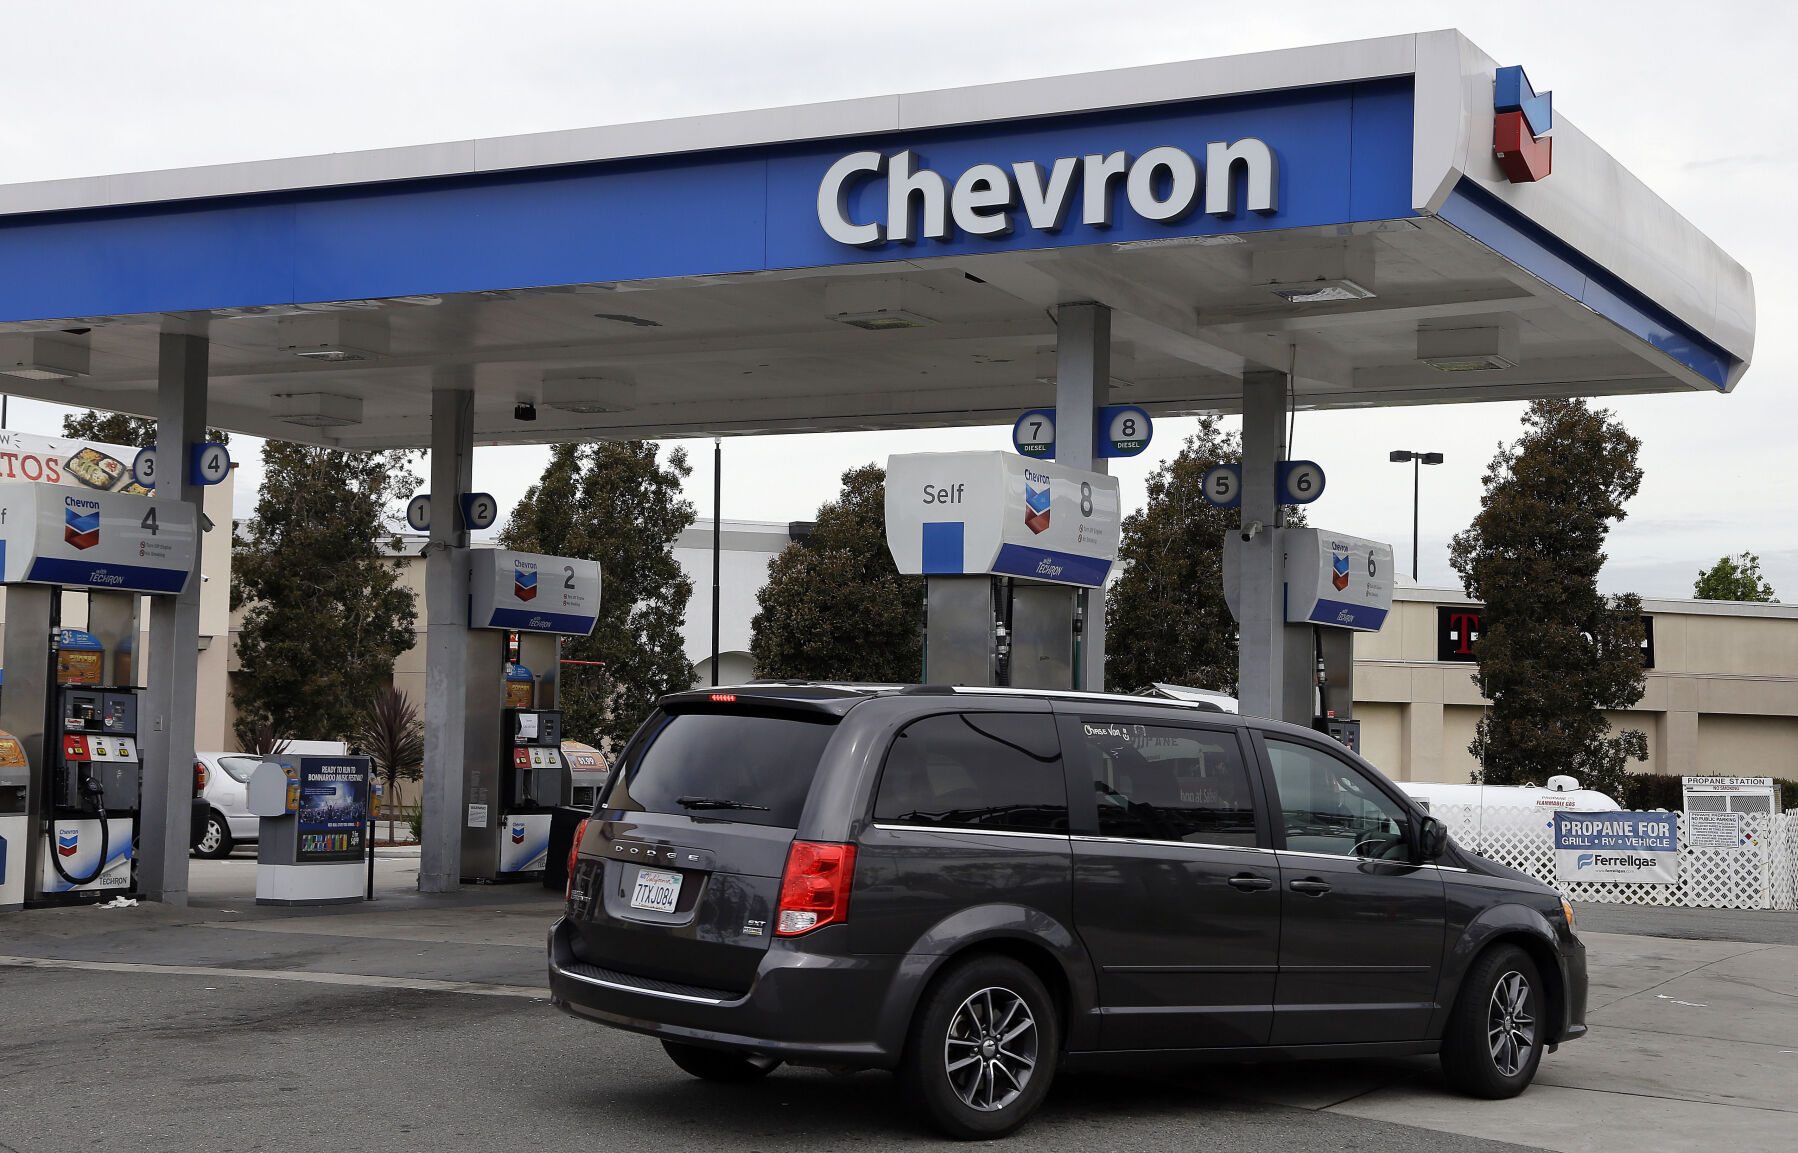 <p>FILE - A motorist drives near the pumps at a Chevron gas station in Oakland, Calif., on April 25, 2017. Chevron is buying Hess Corp. for $53 billion as the biggest U.S. oil companies use a recent windfall in profits to buy up smaller competitors, Chevron said in a press release Monday, Oct. 23, 2023. (AP Photo/Ben Margot, File)</p>   PHOTO CREDIT: Ben Margot 